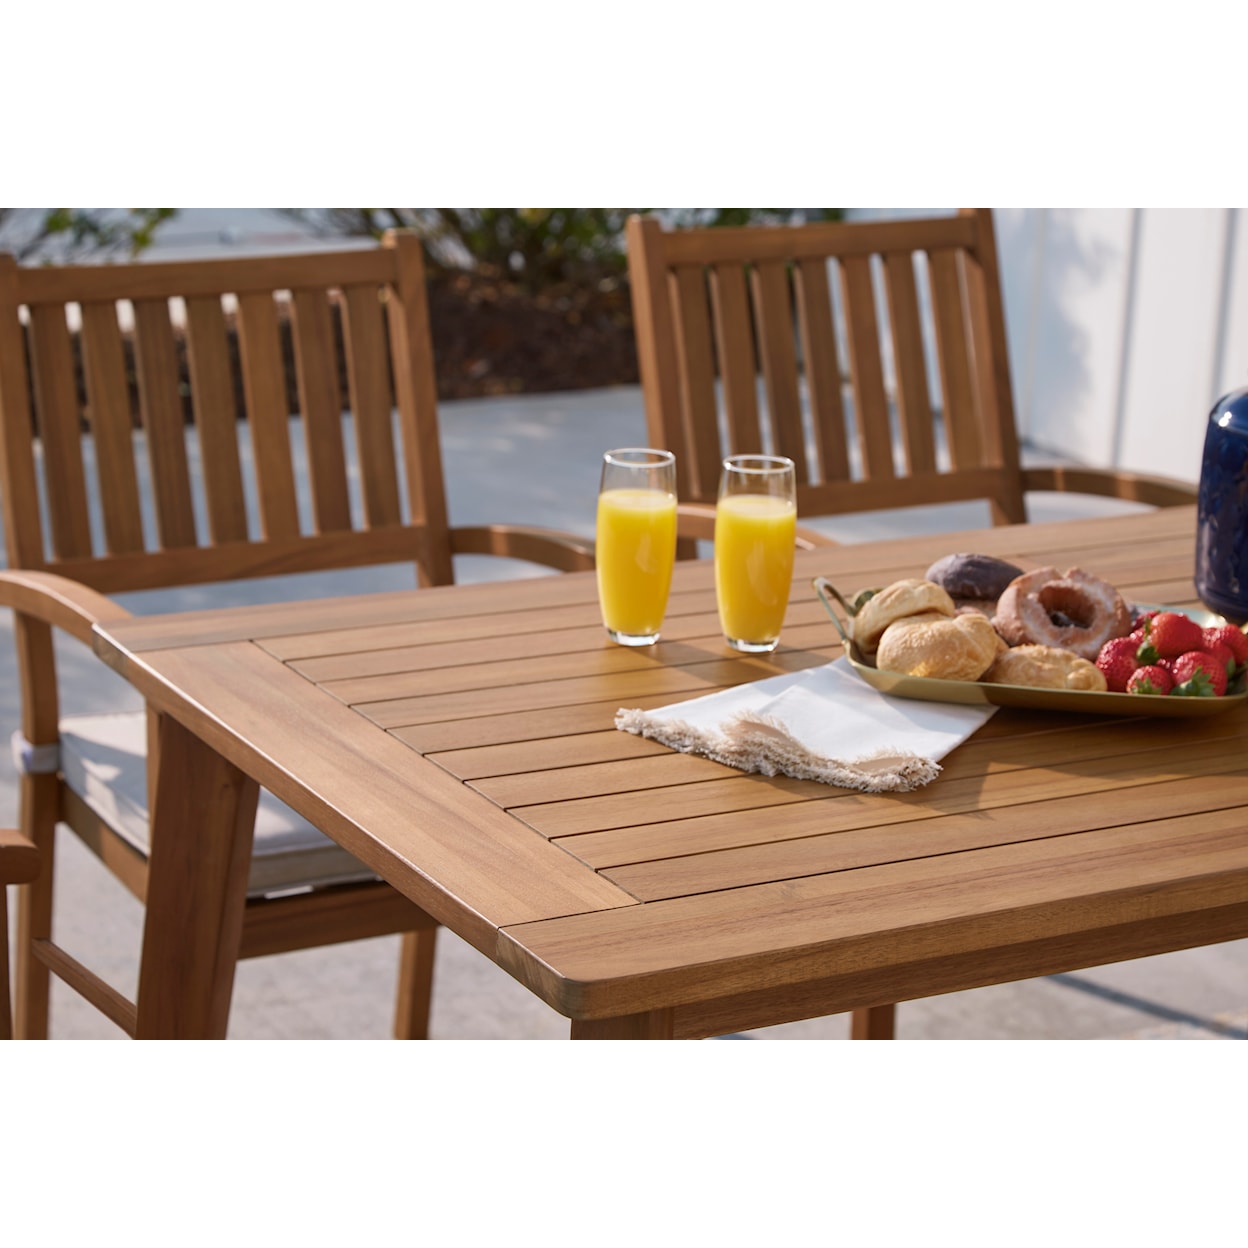 Ashley Furniture Signature Design Janiyah Outdoor Dining Table with 4 Chairs